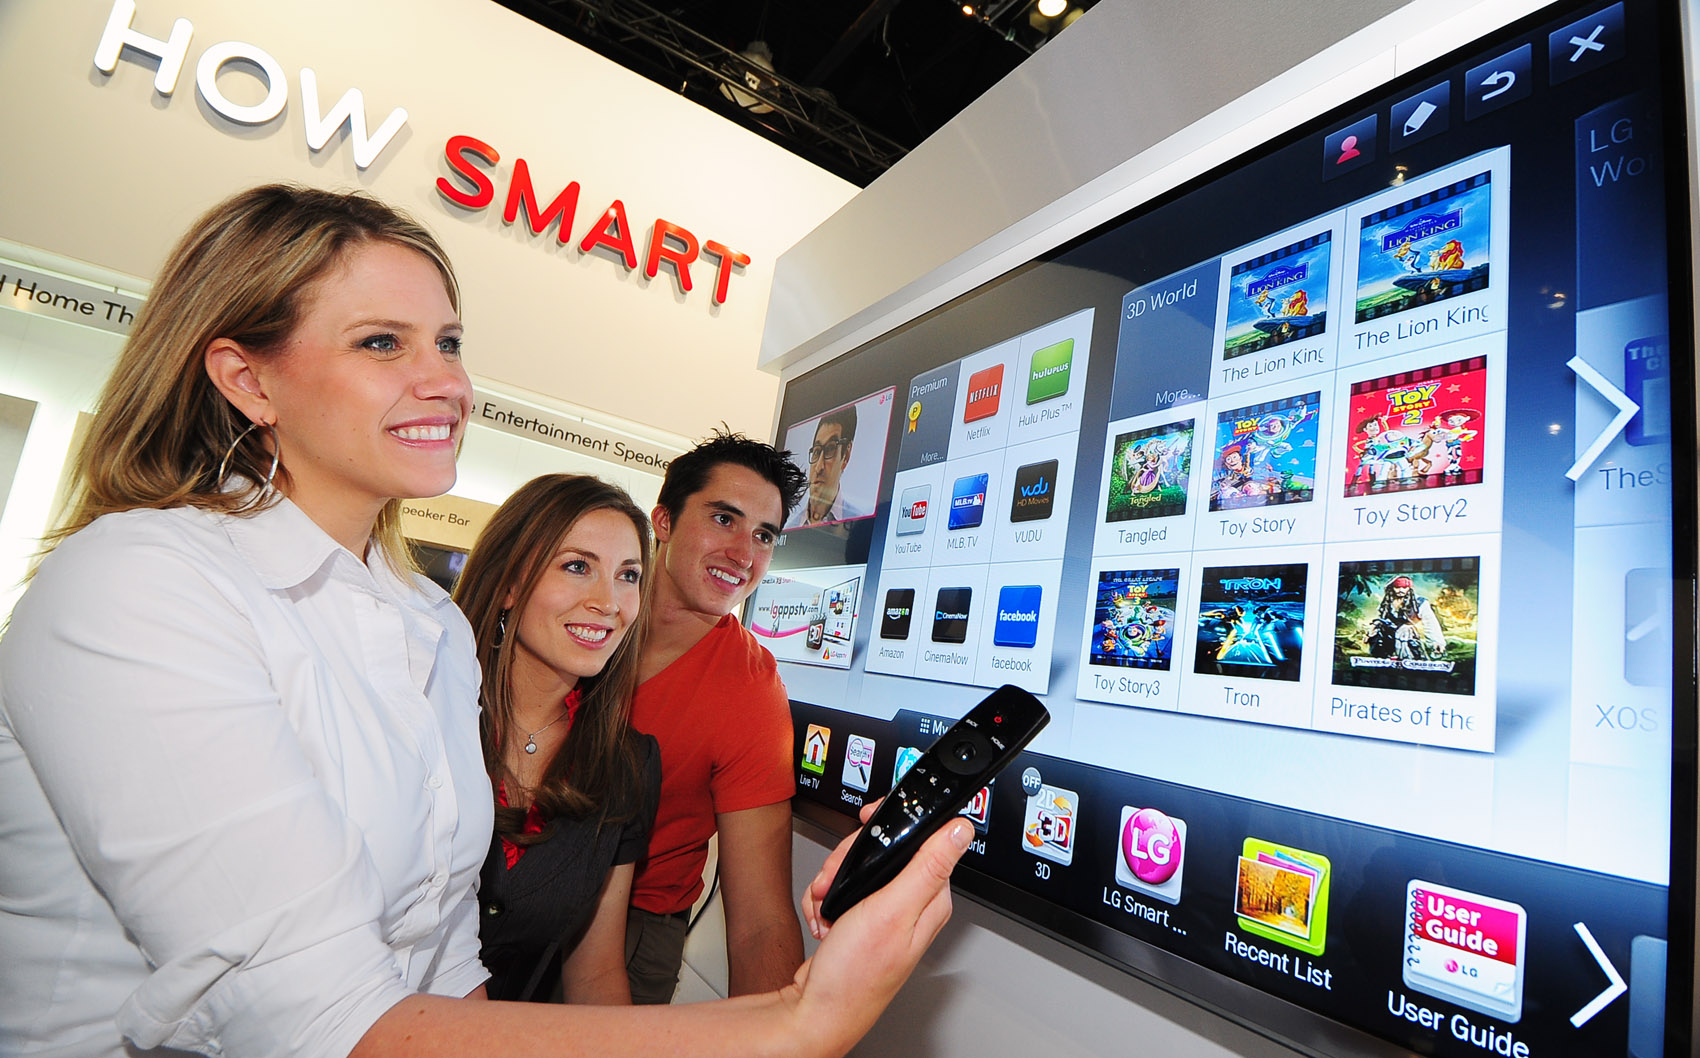 Visitors to the LG booth trying LG’s Proprietary Smart TV Platform, NetCast, at CES 2012